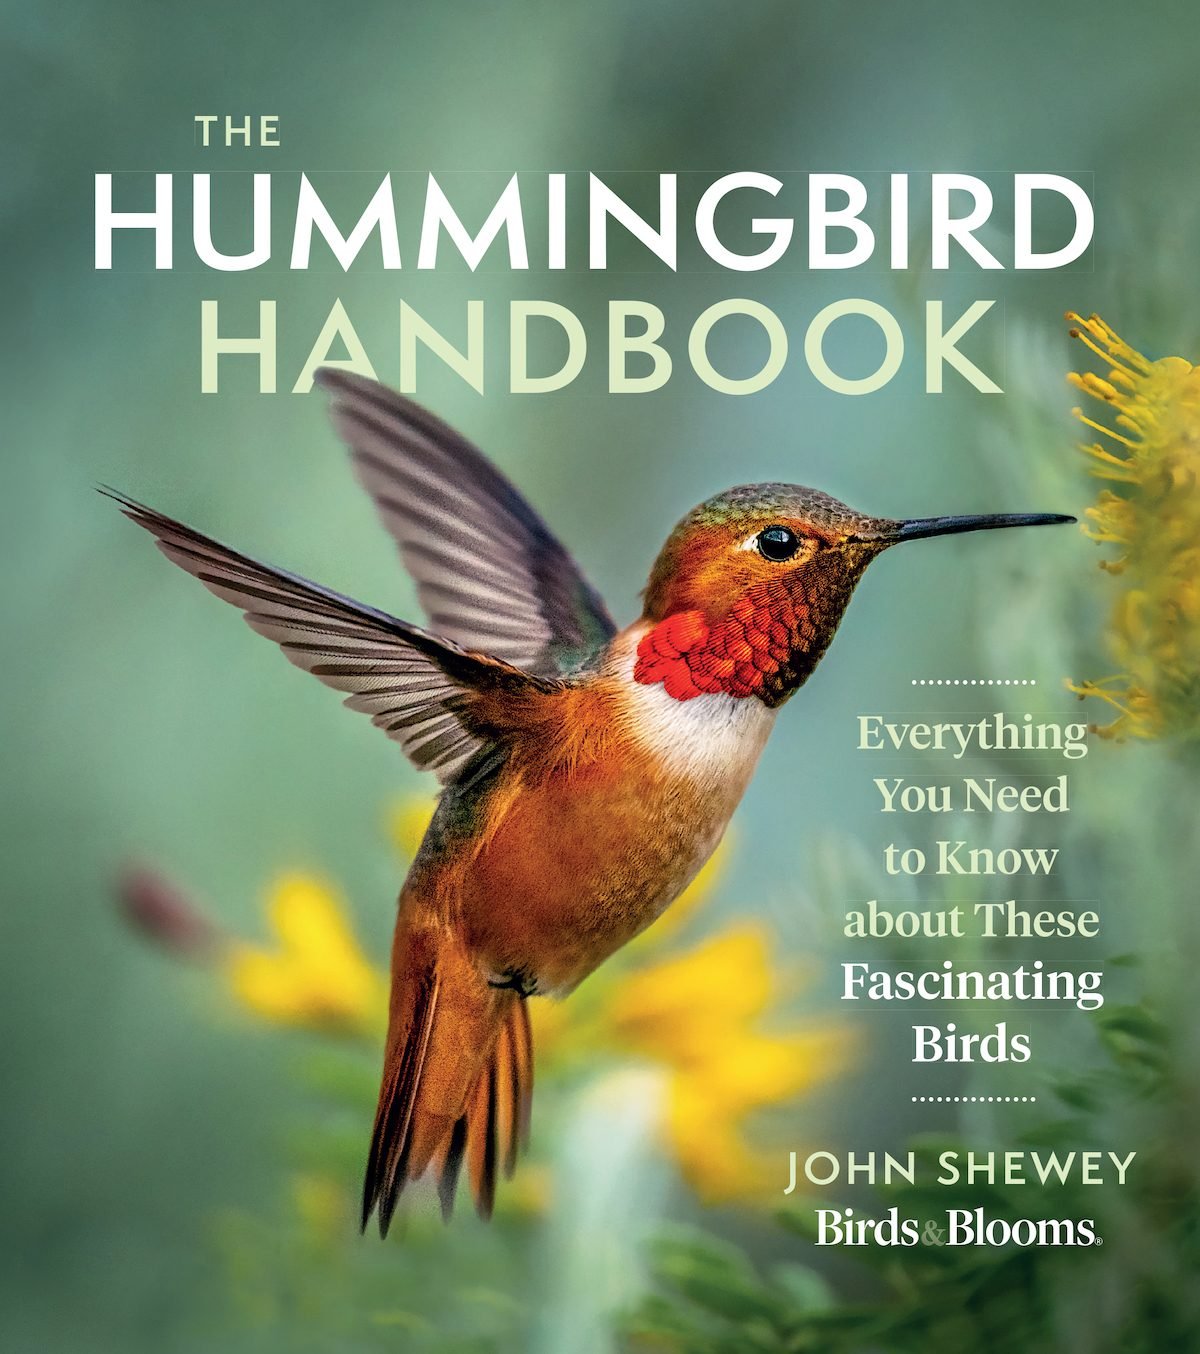 Our Favorite Hummingbird Books for Bird Lovers